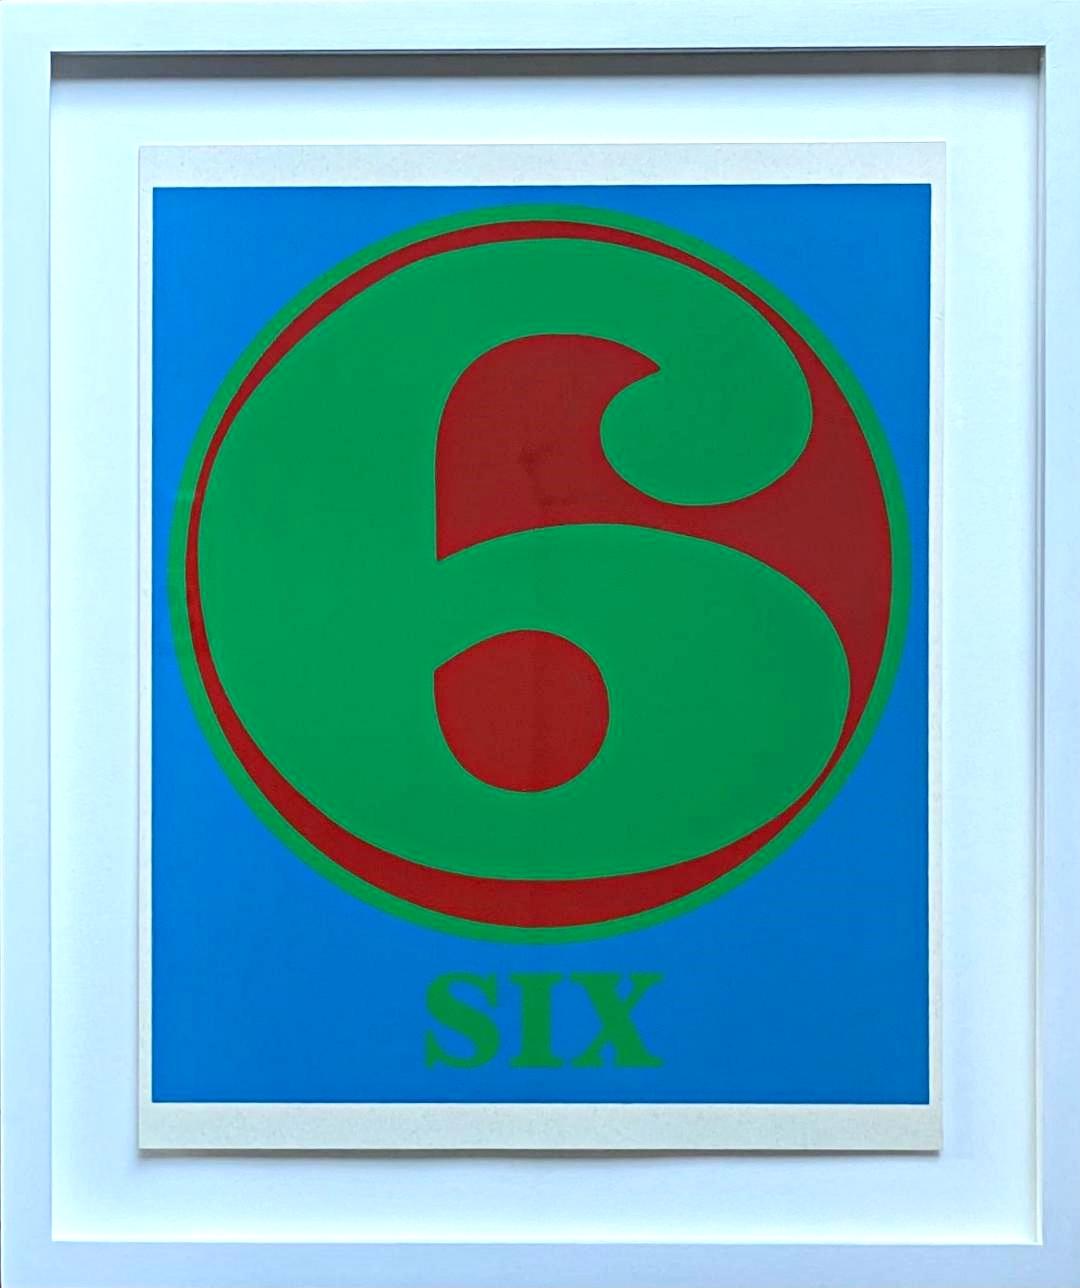 Robert Indiana Abstract Print - 6 (Six), from the original Numbers portfolio (Sheehan 46-55)